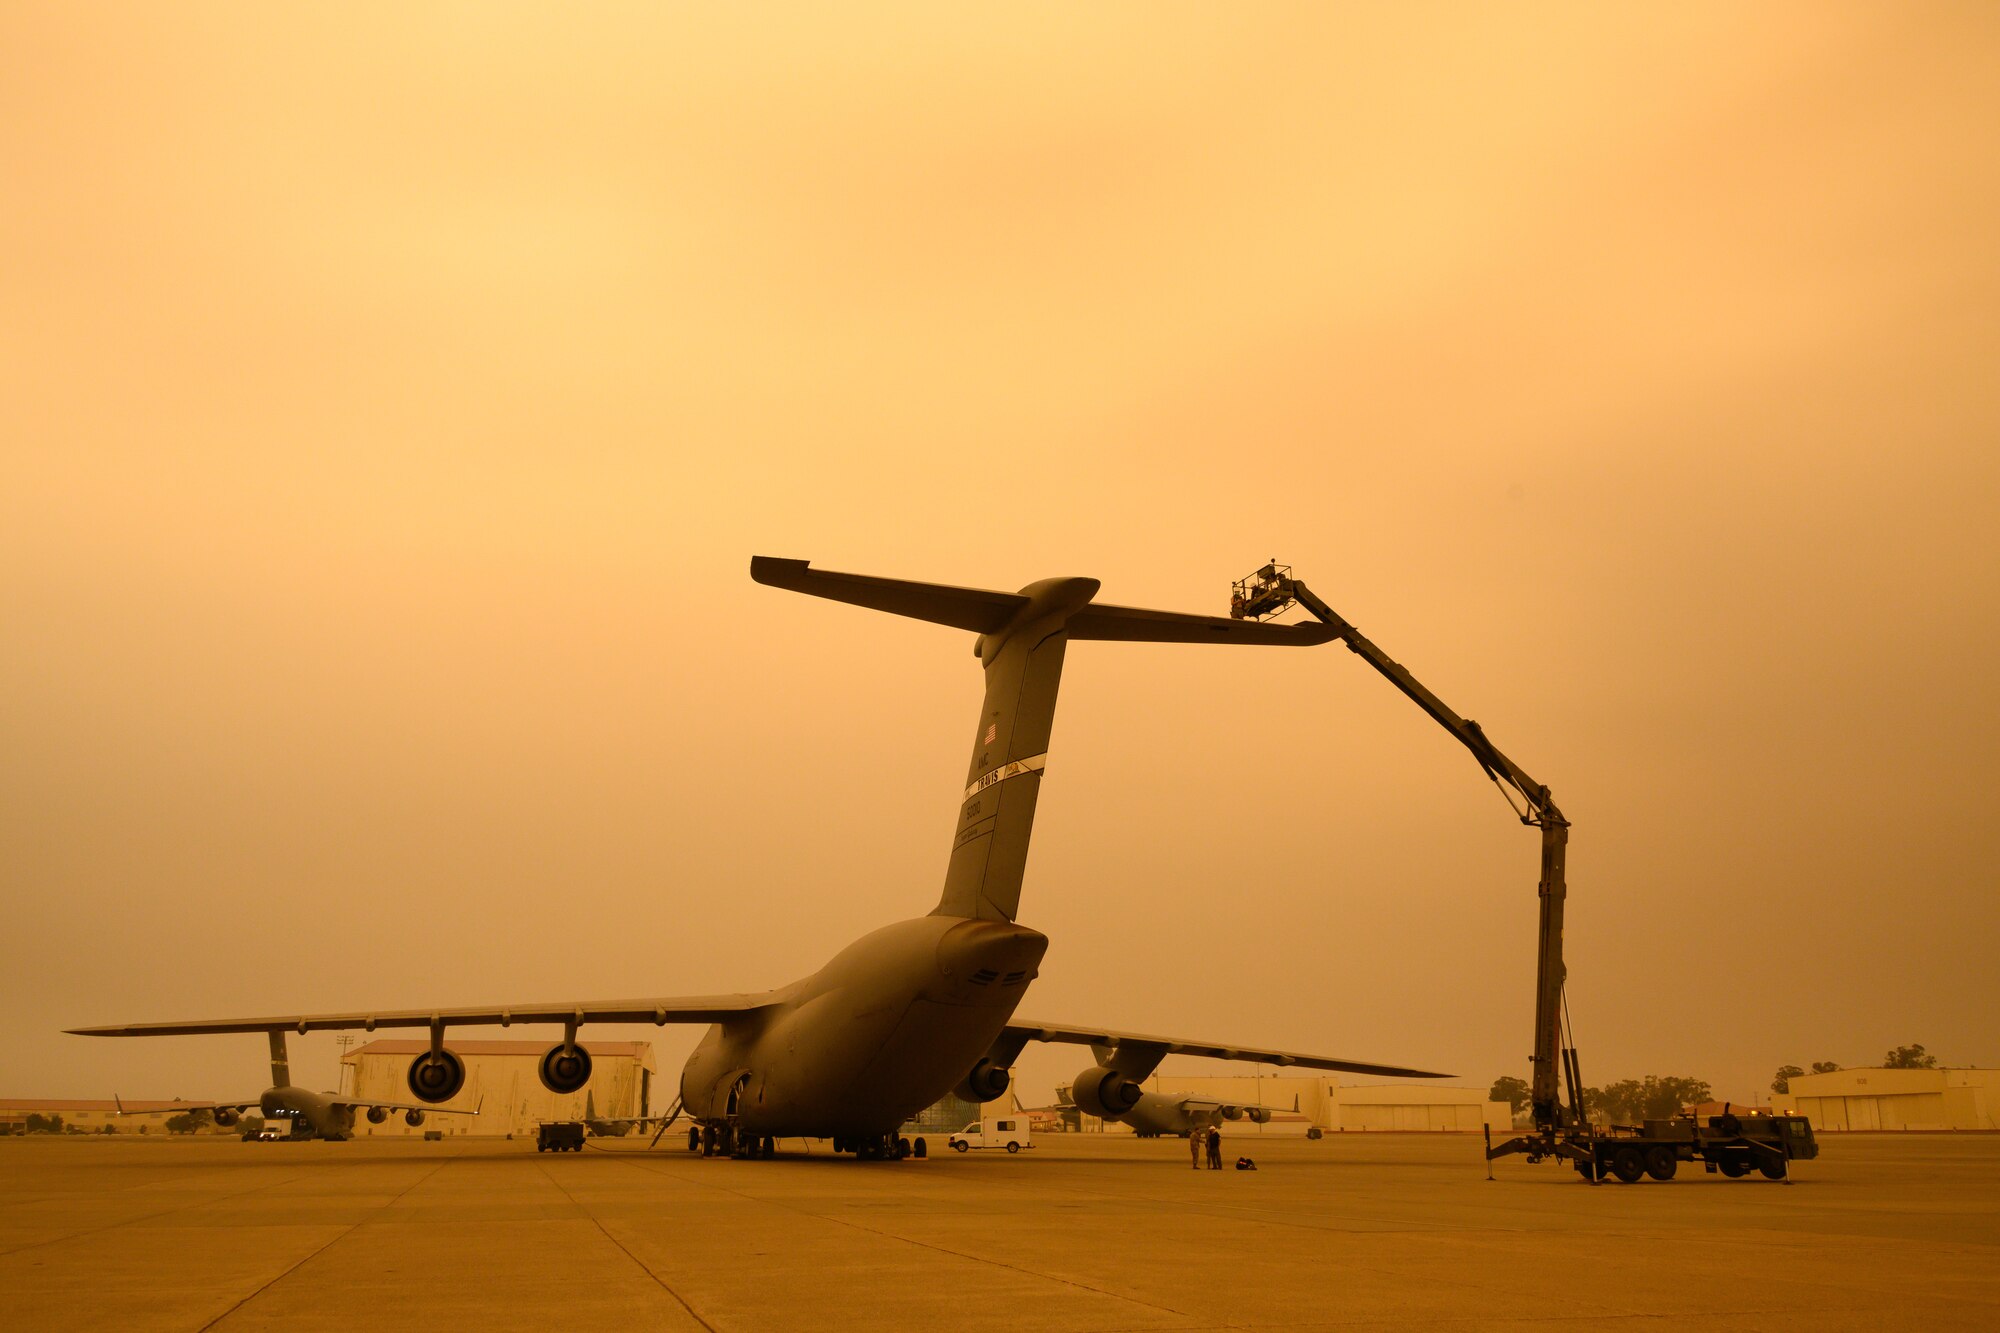 Airmen are lifted in a large condor lift above a C-5M tail with a smokey, yellowish sky.